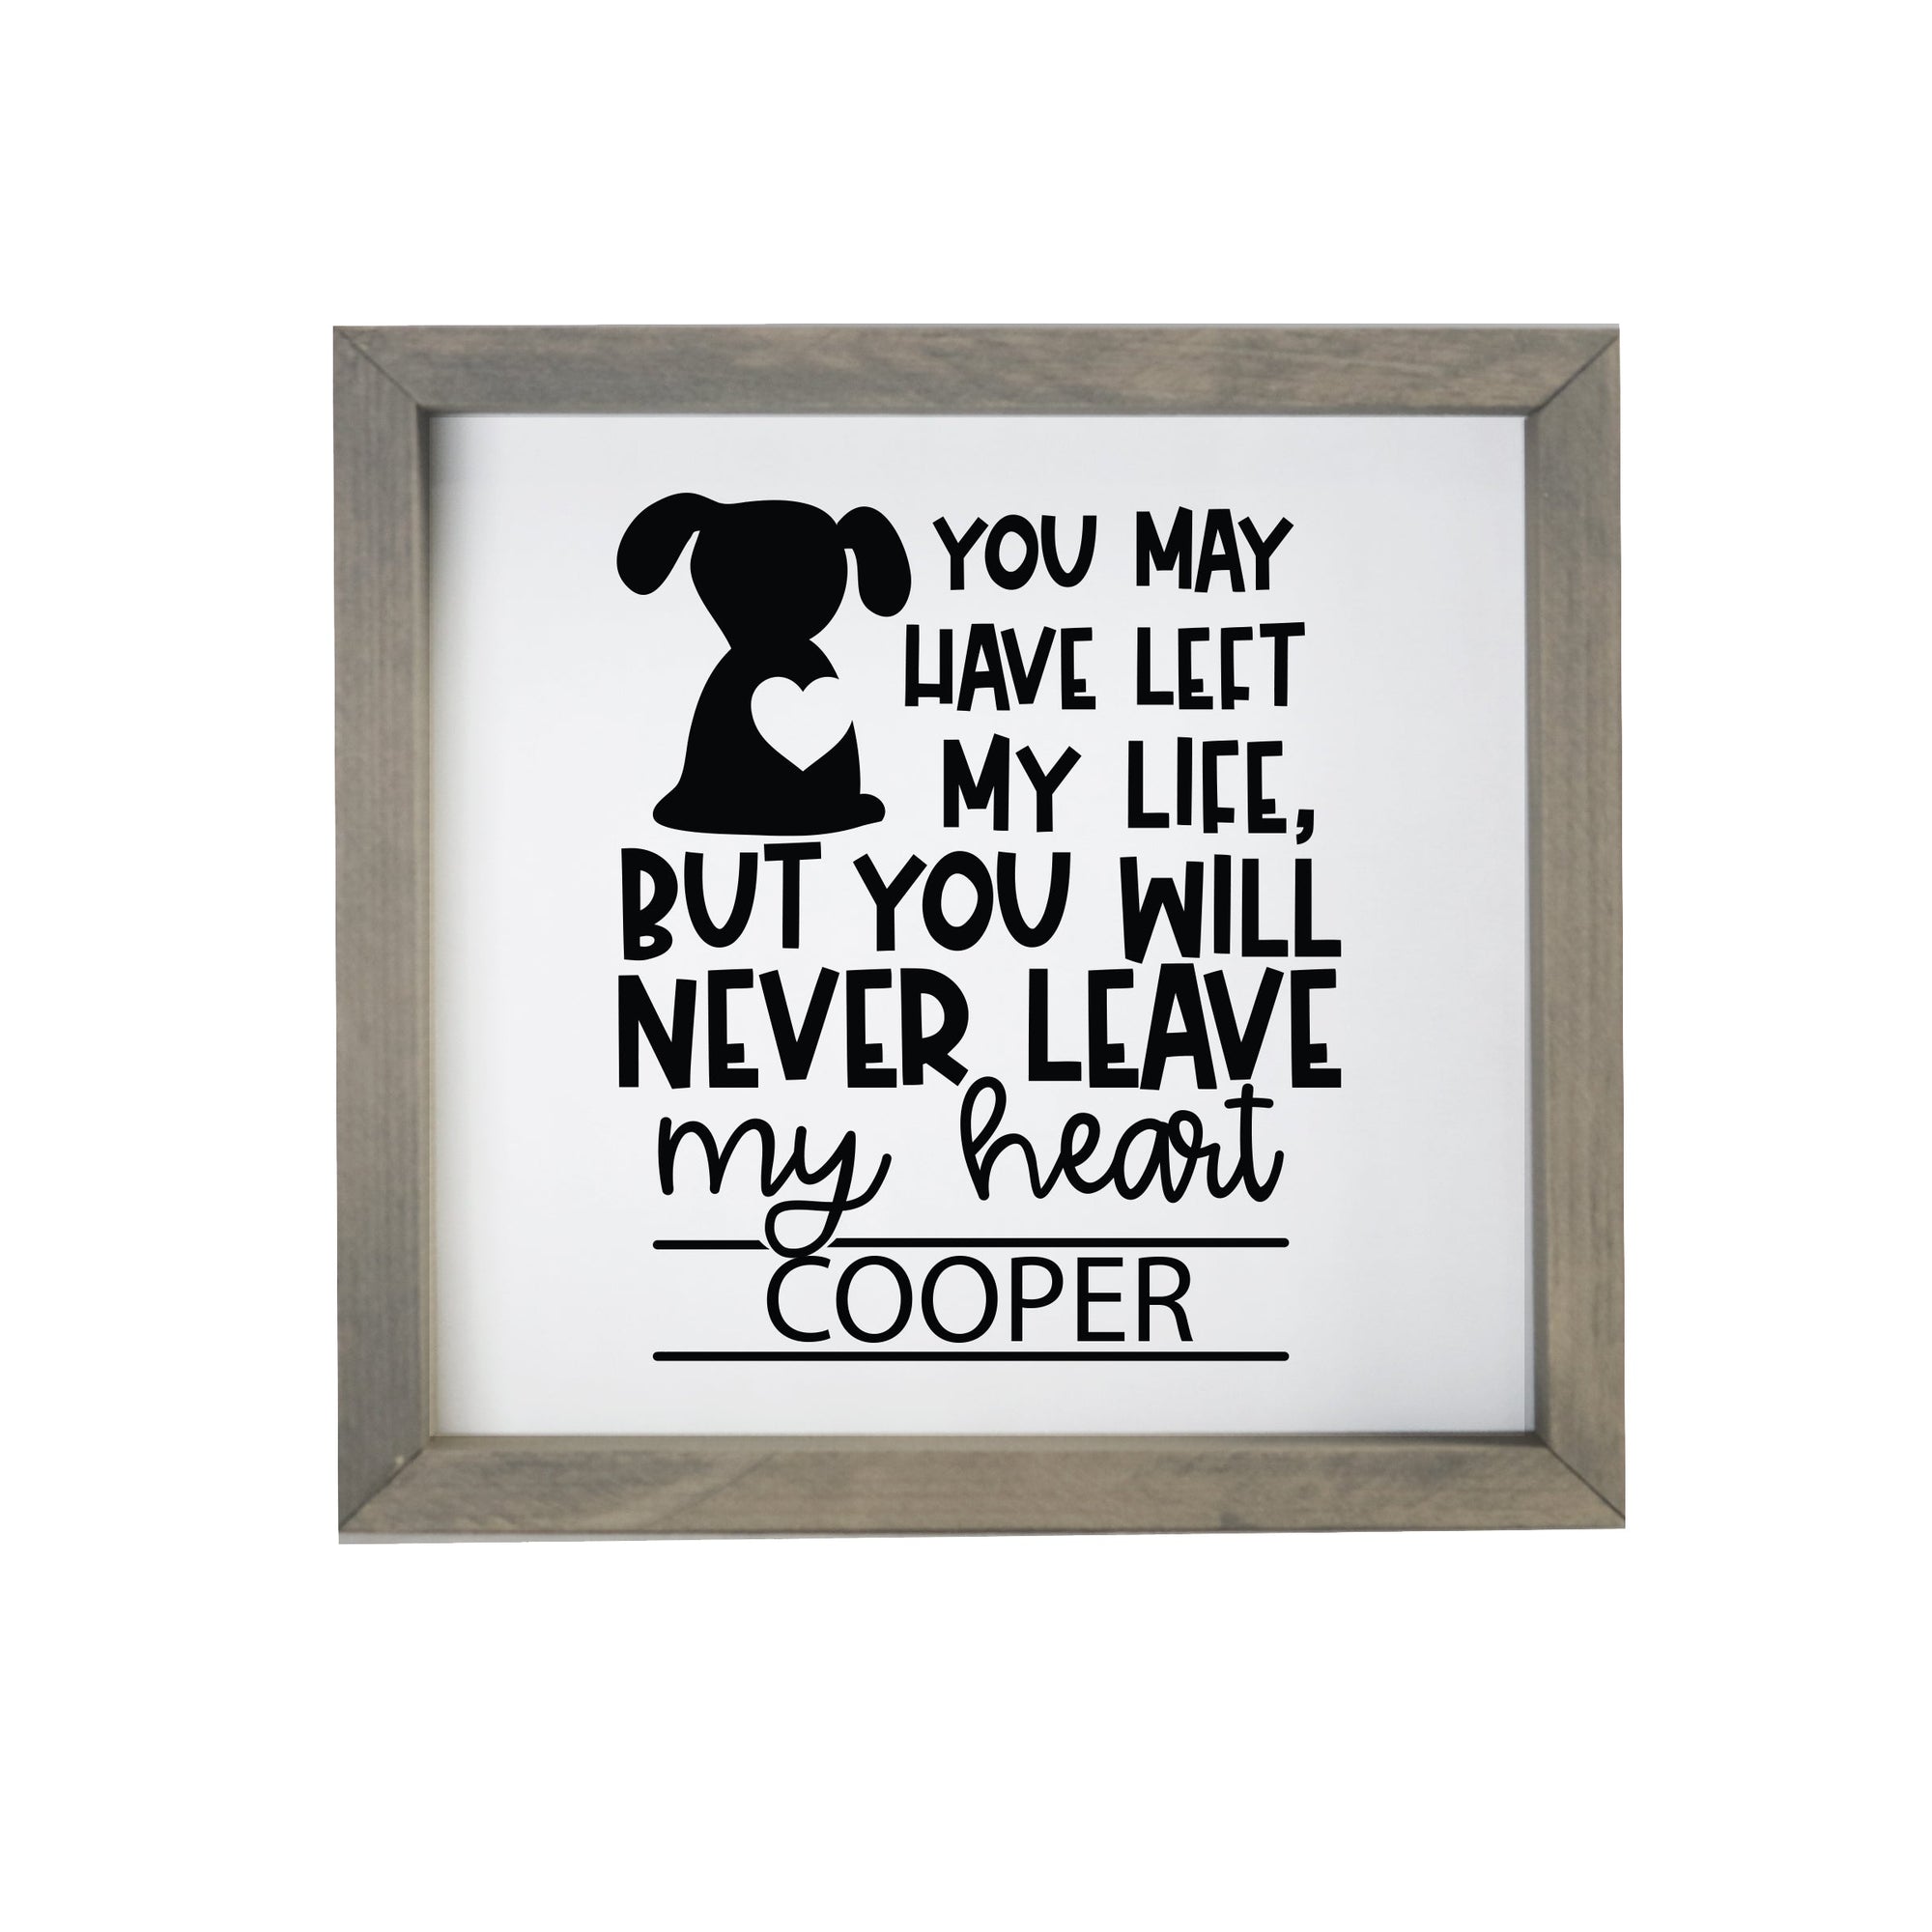 11.5x11.5 Grey Framed Pet Memorial Shadow Box with phrase "You May Have Left My Life, But You Will Never Leave My Heart"